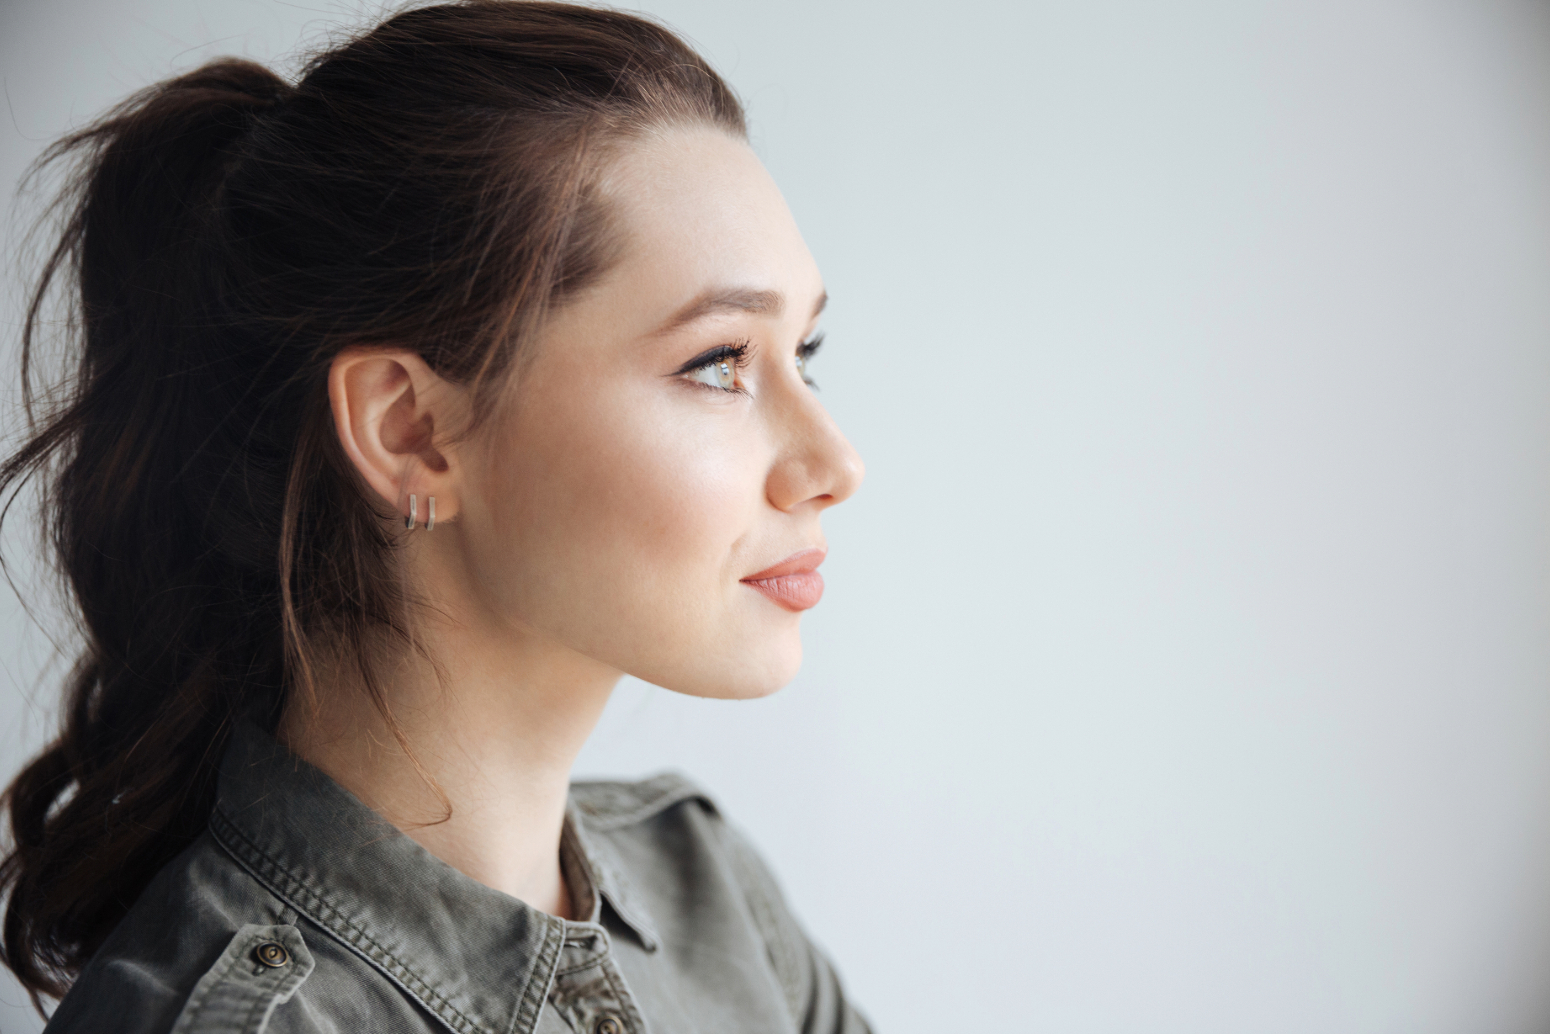 side profile on brunette woman looking confidently ahead and ready to defeat negative self-talk